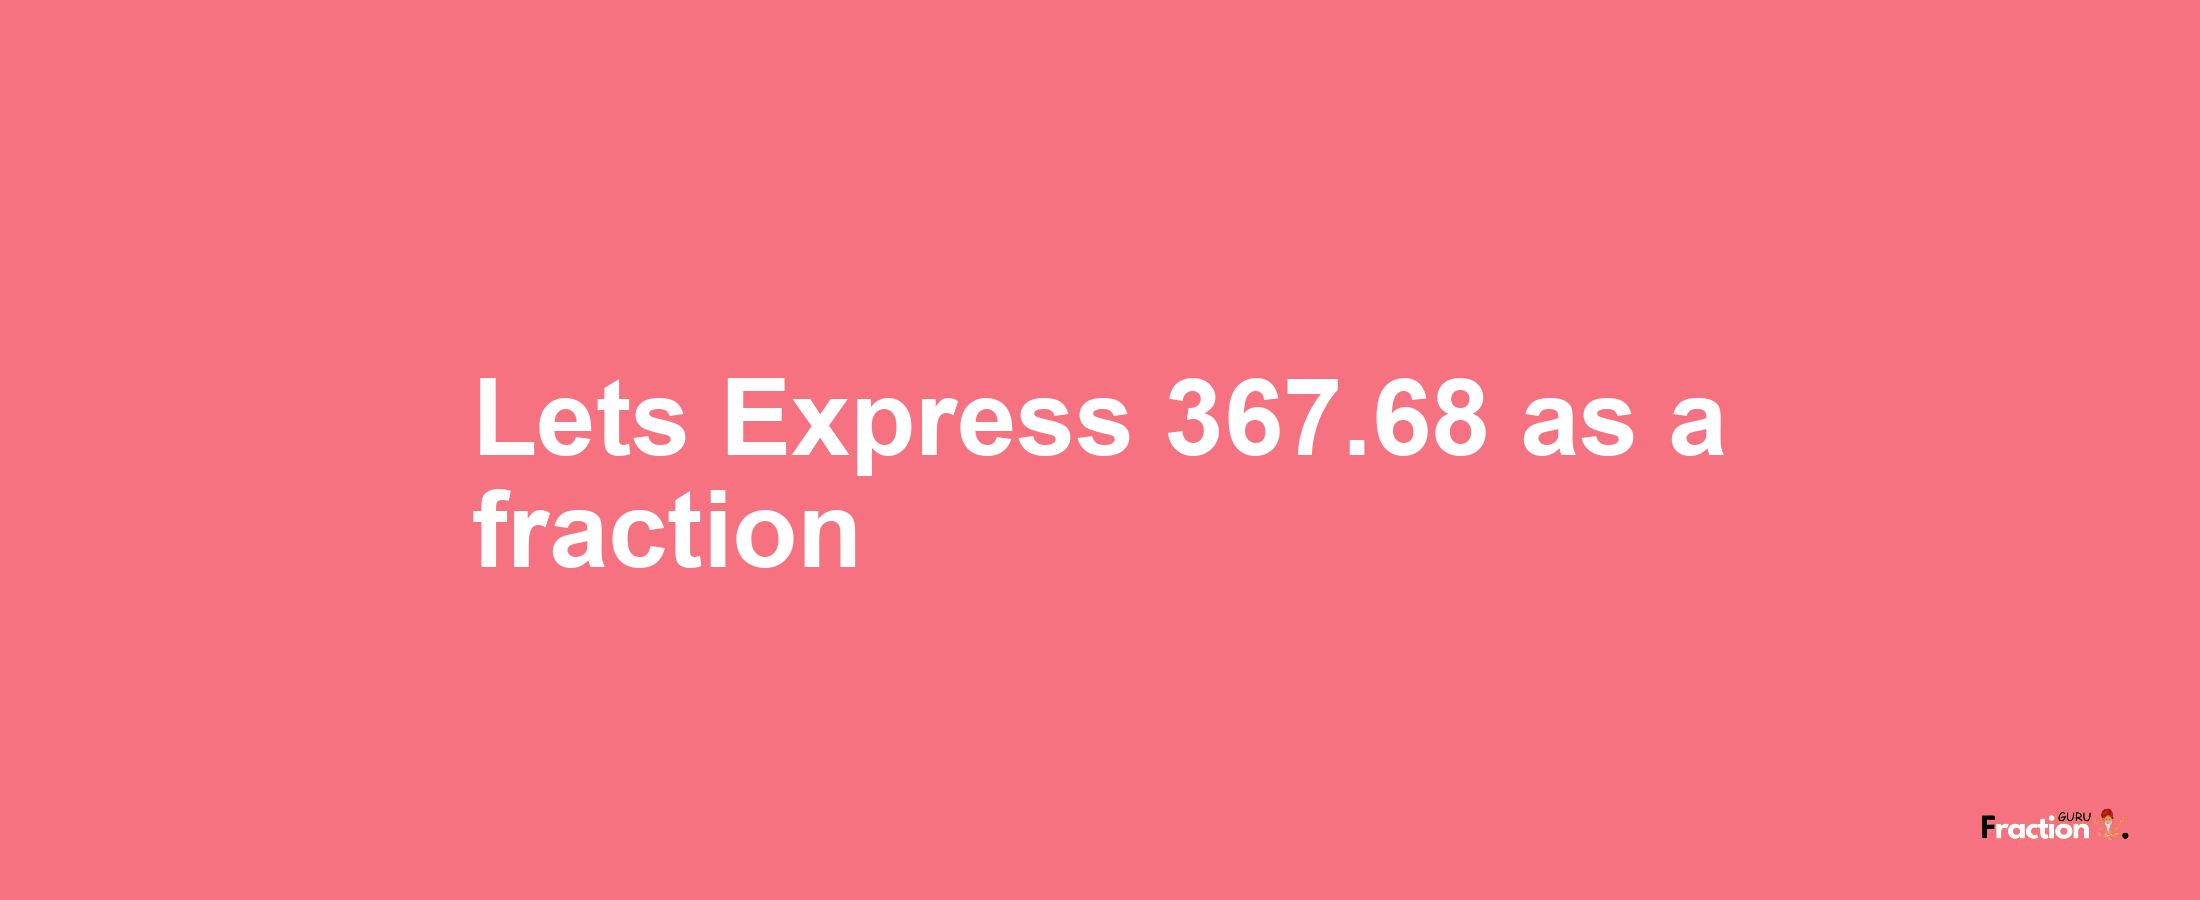 Lets Express 367.68 as afraction